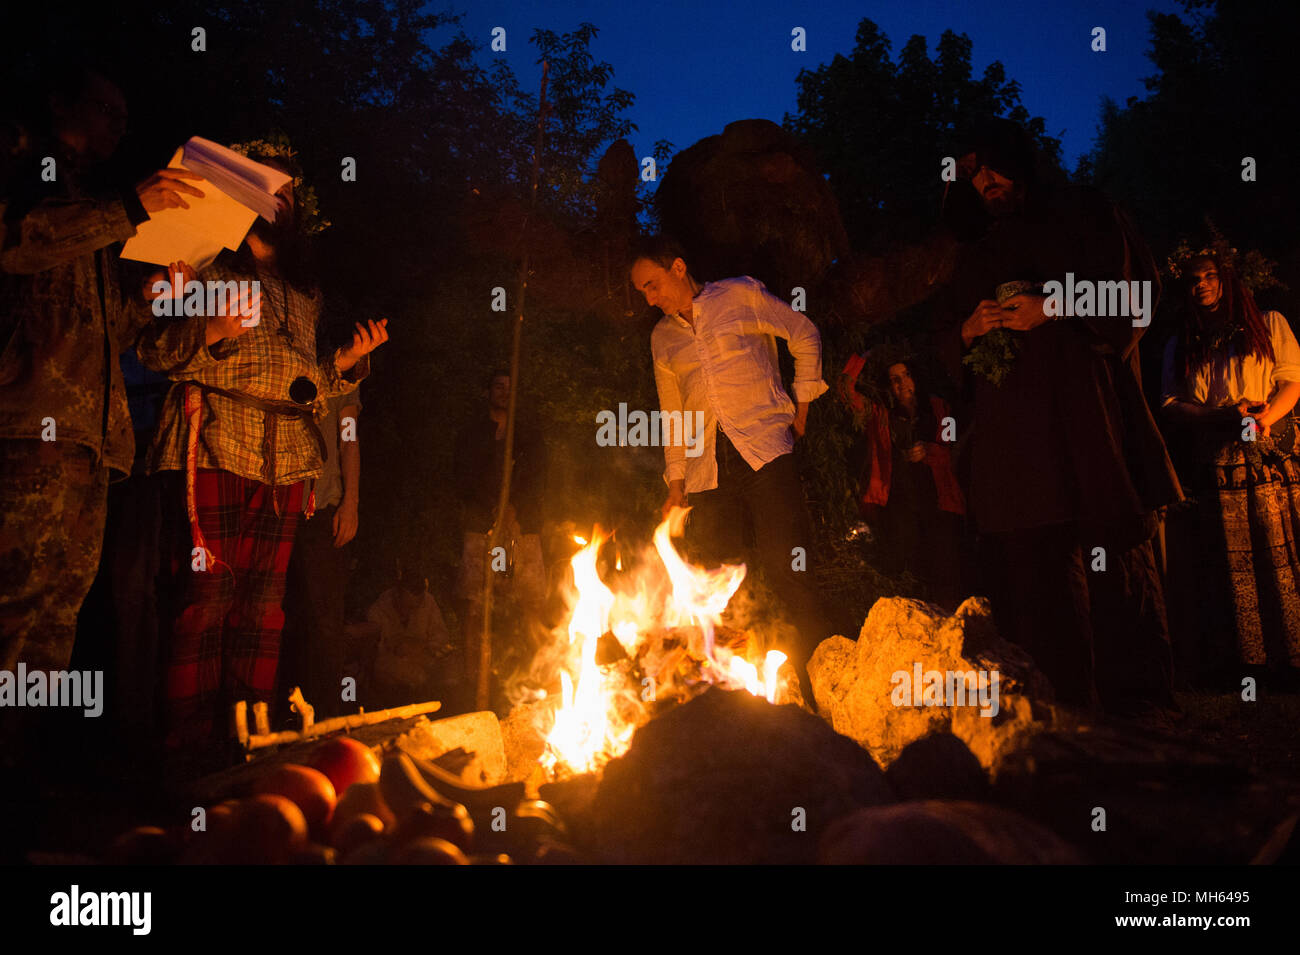 Participants pray during the Beltane feast of Fire next to Krakau Mound in Krakow. The Beltane Fire Festival is an annual participatory arts event held on the night 30 April to mark the beginning of the Summer. Stock Photo